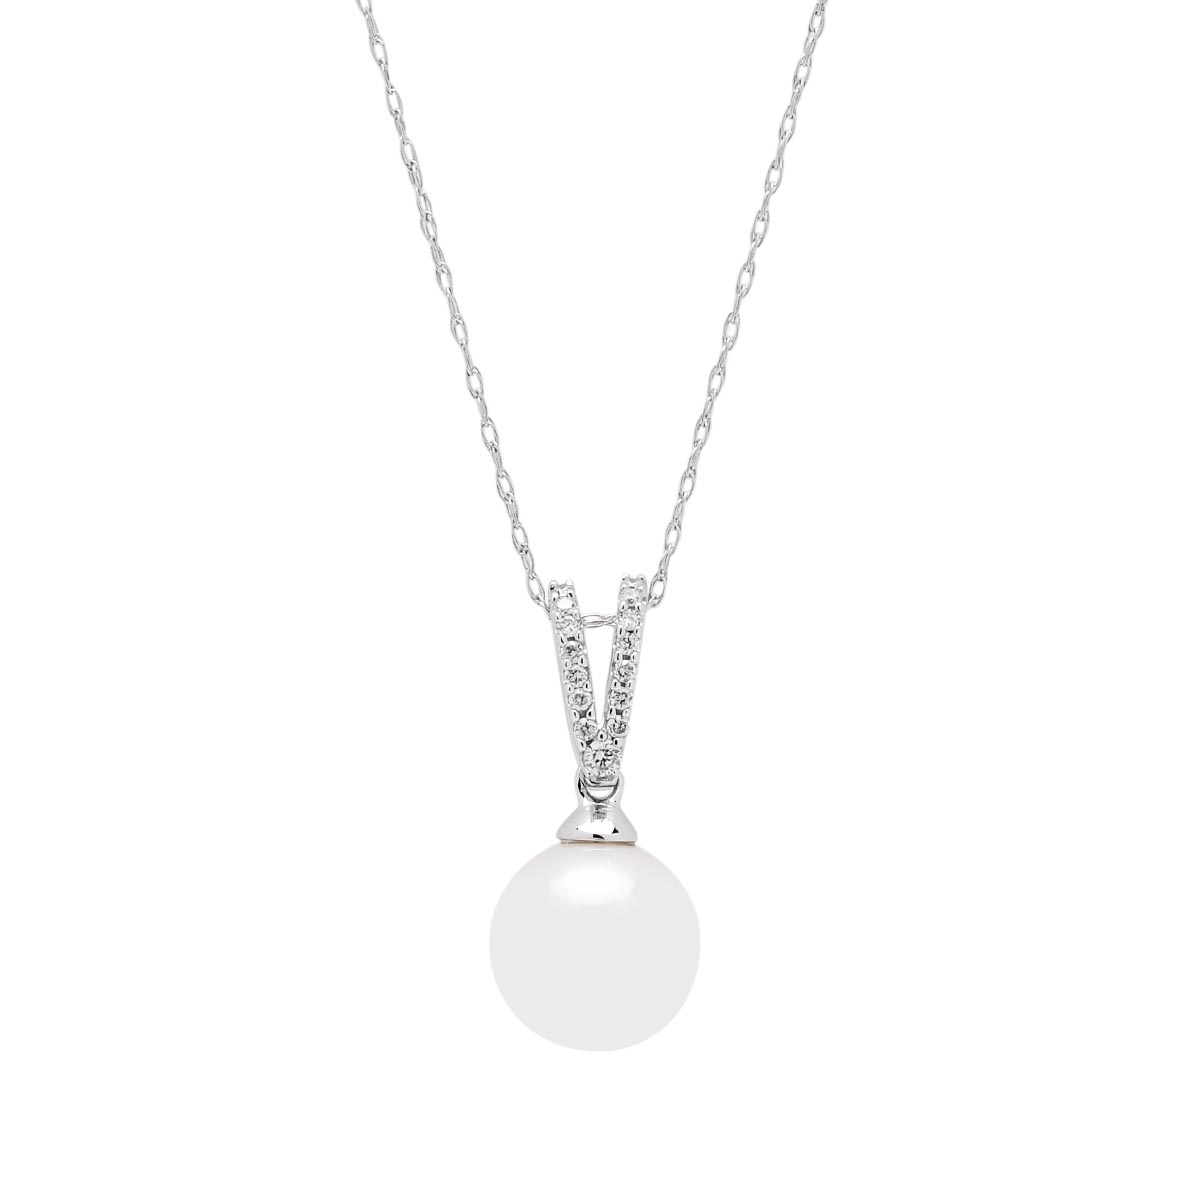 Mastoloni Cultured Freshwater Pearl Necklace in 14kt White Gold with Diamonds (1/10ct tw and 8.5-9mm pearl)